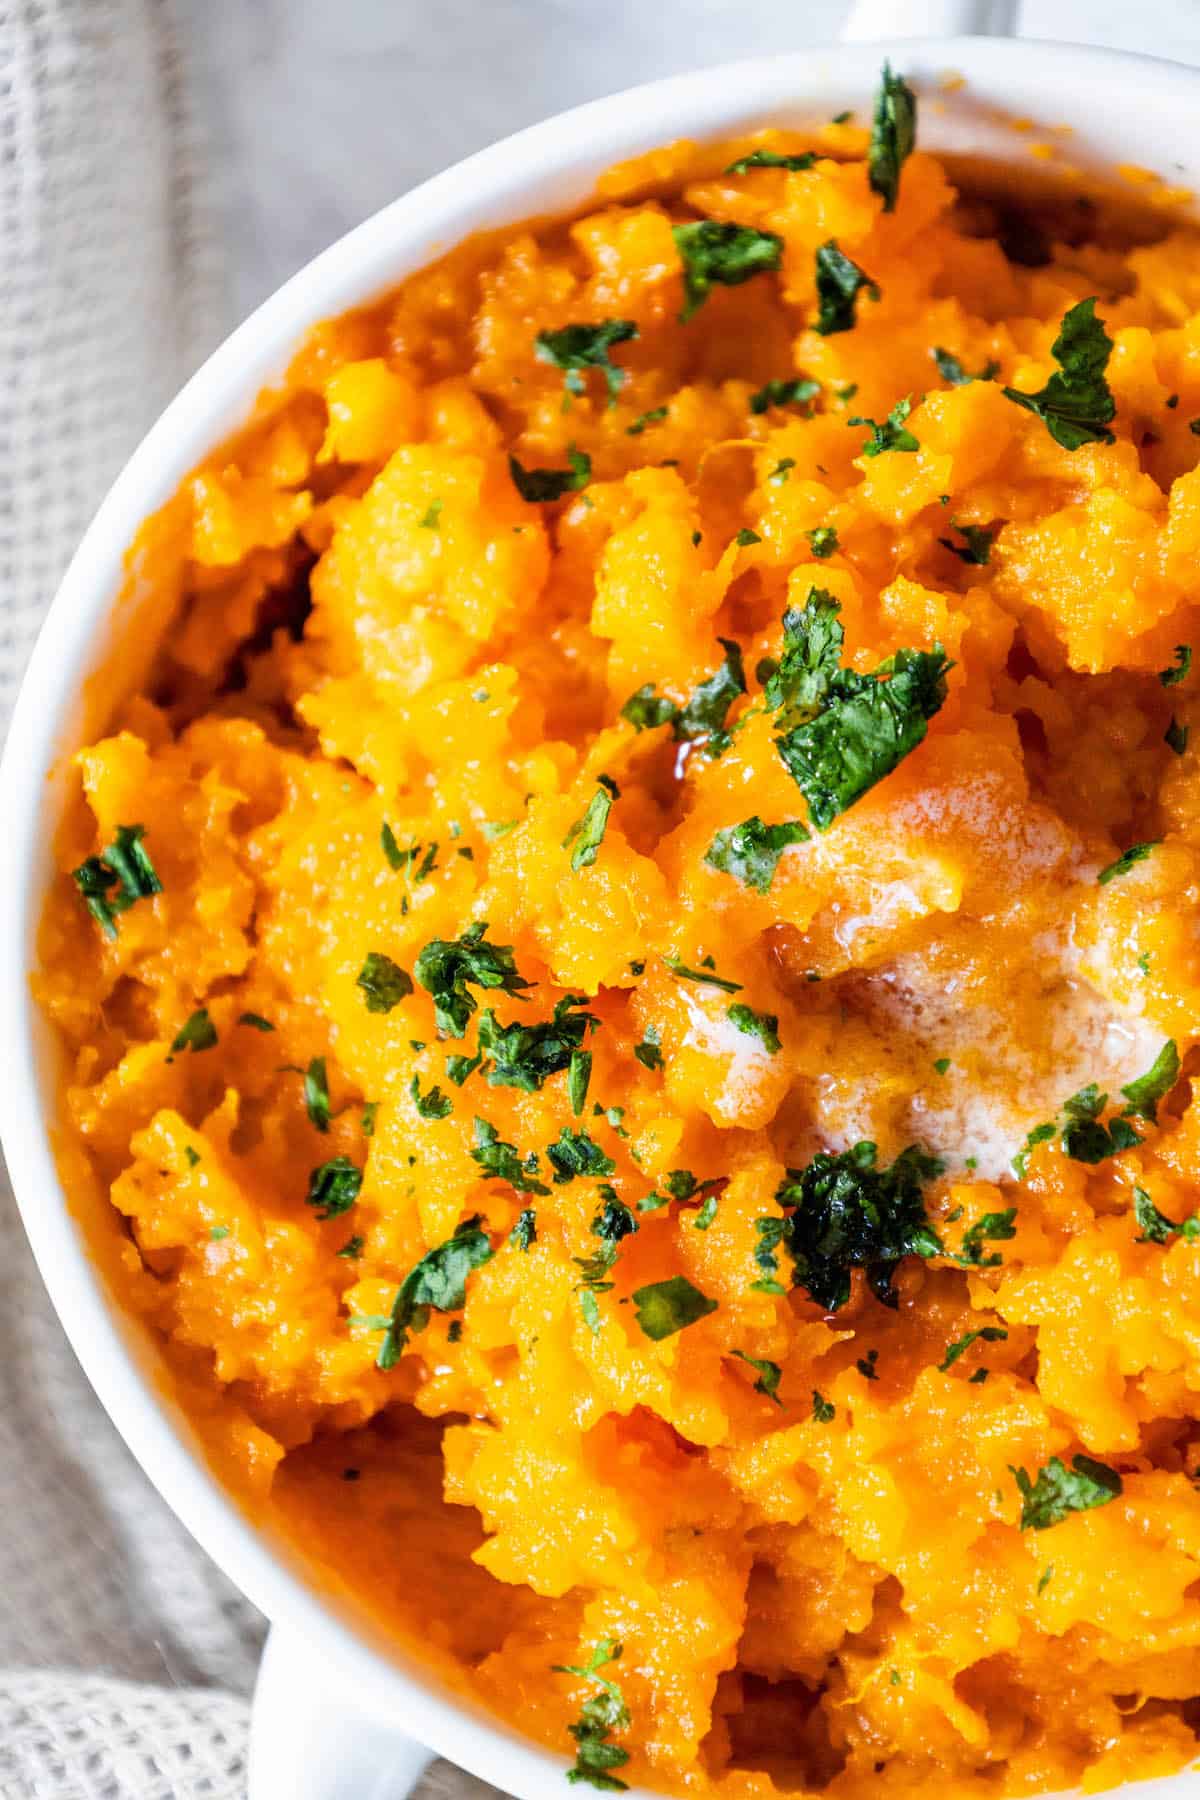 A bowl of mashed sweet potatoes with parsley.